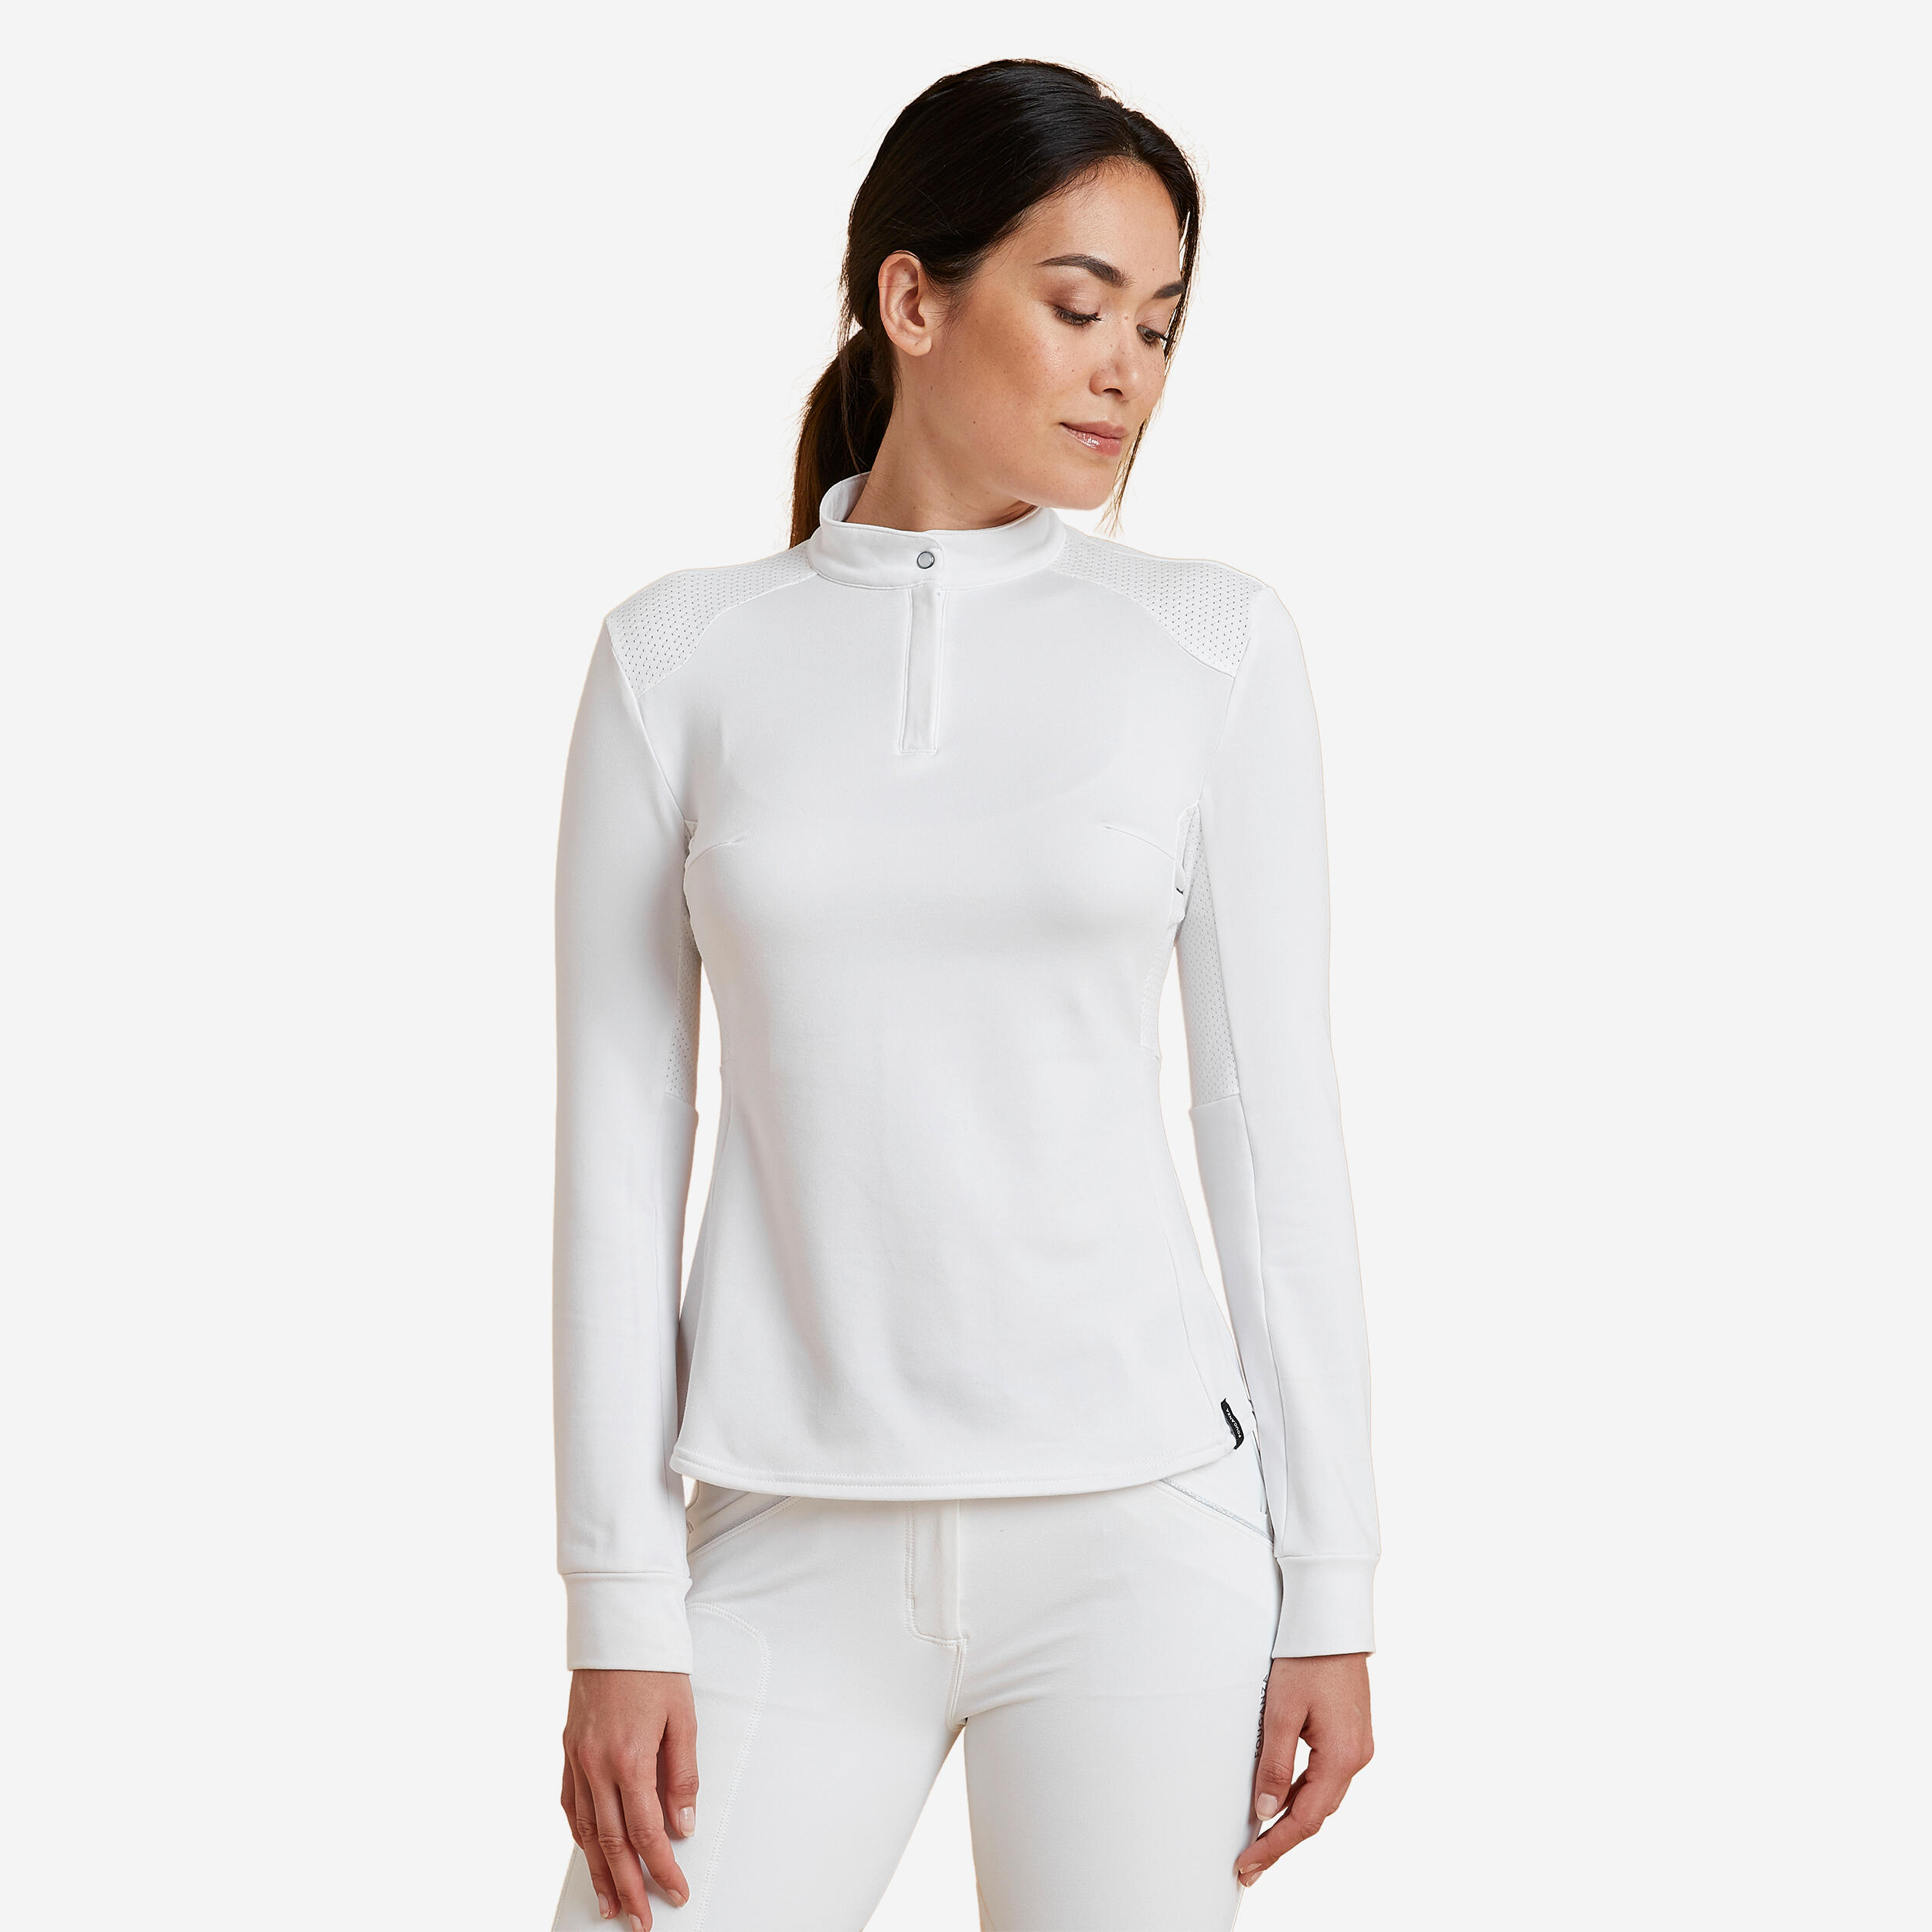 FOUGANZA Women's Horse Riding Long-Sleeved Warm Competition Polo 500 - White